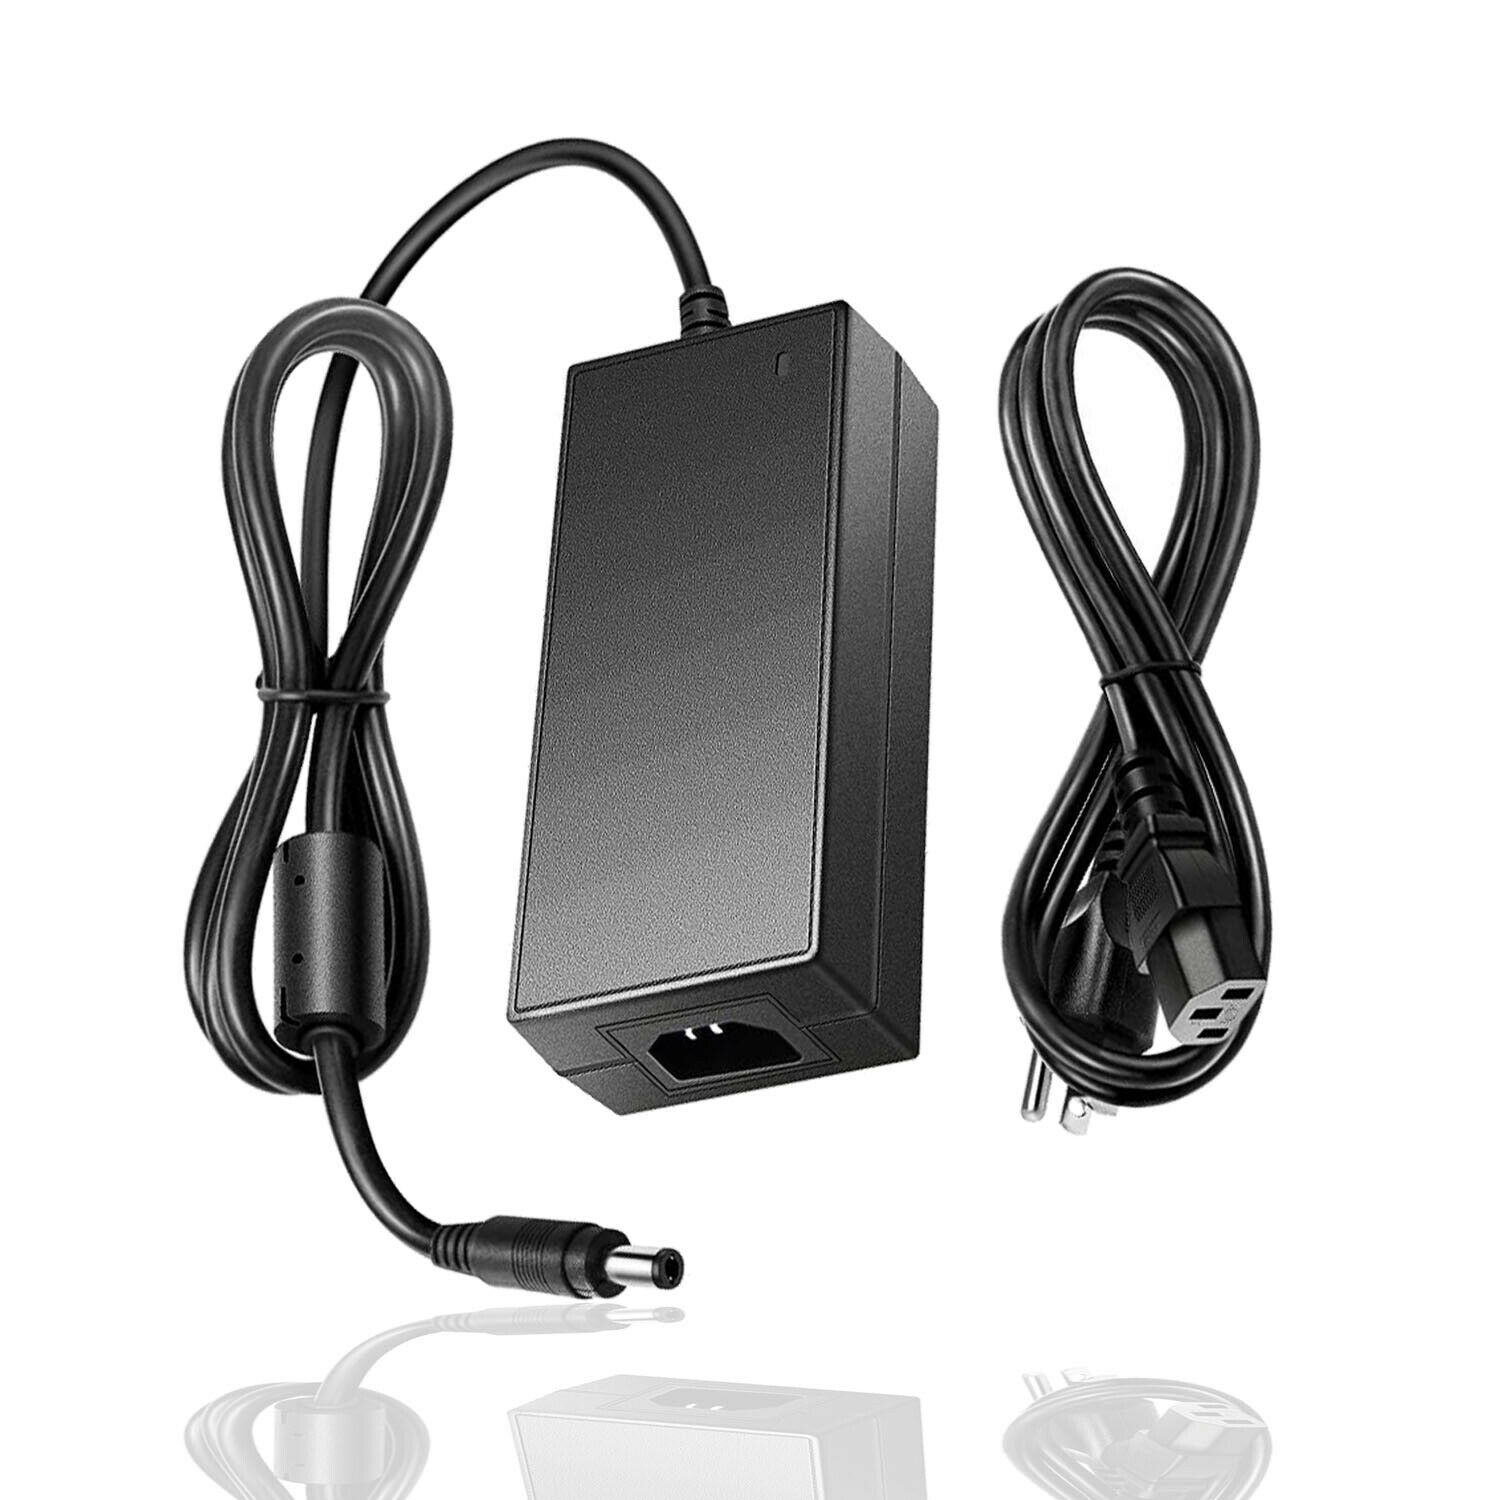 Authentic SUNPOWER US 5V8A Power Adapter SB-058AOF-11 Brand New Charger 5.5 * 2.5 Power brand: SUNPOWER/USA 【 Model 】 SB